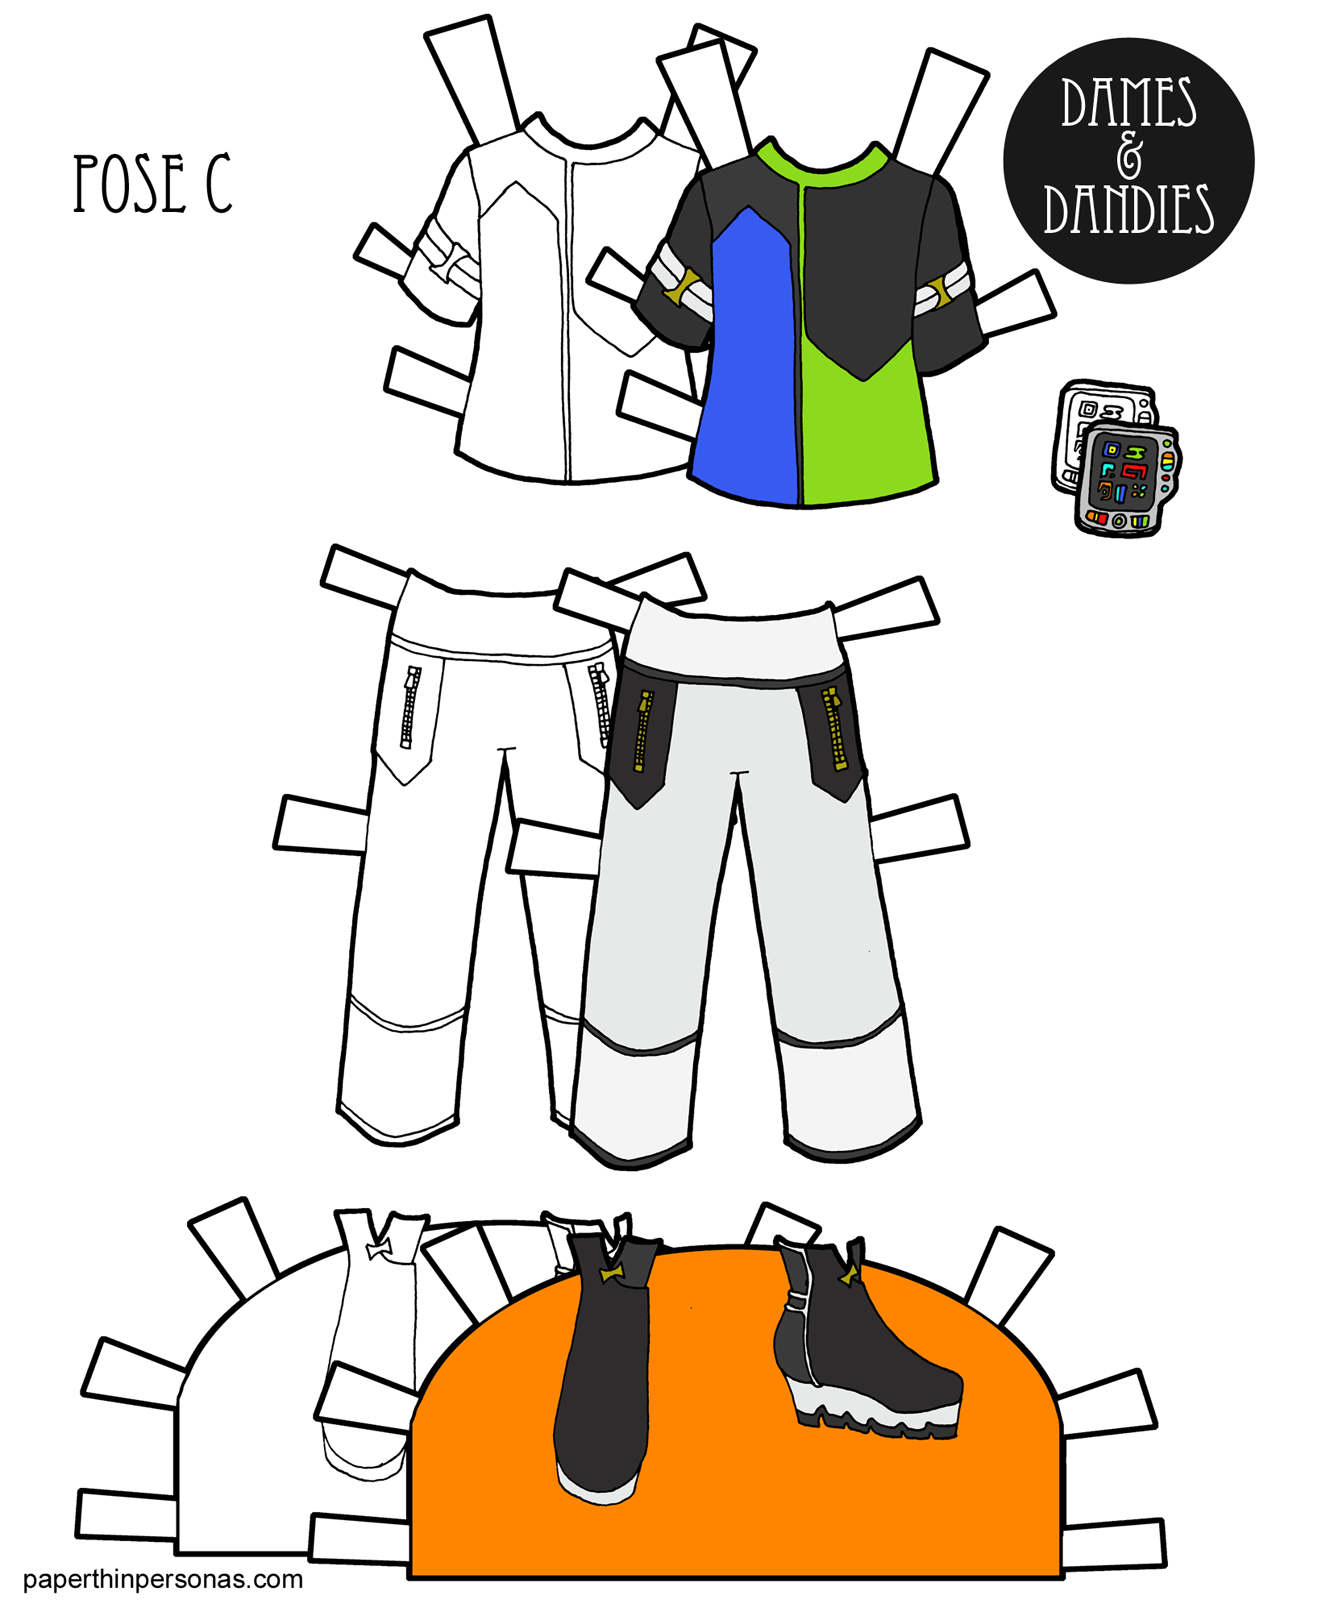 Some 1980s Sci Fi Inspired Paper Doll Clothing For The Guy Paper Dolls • Paper Thin Personas